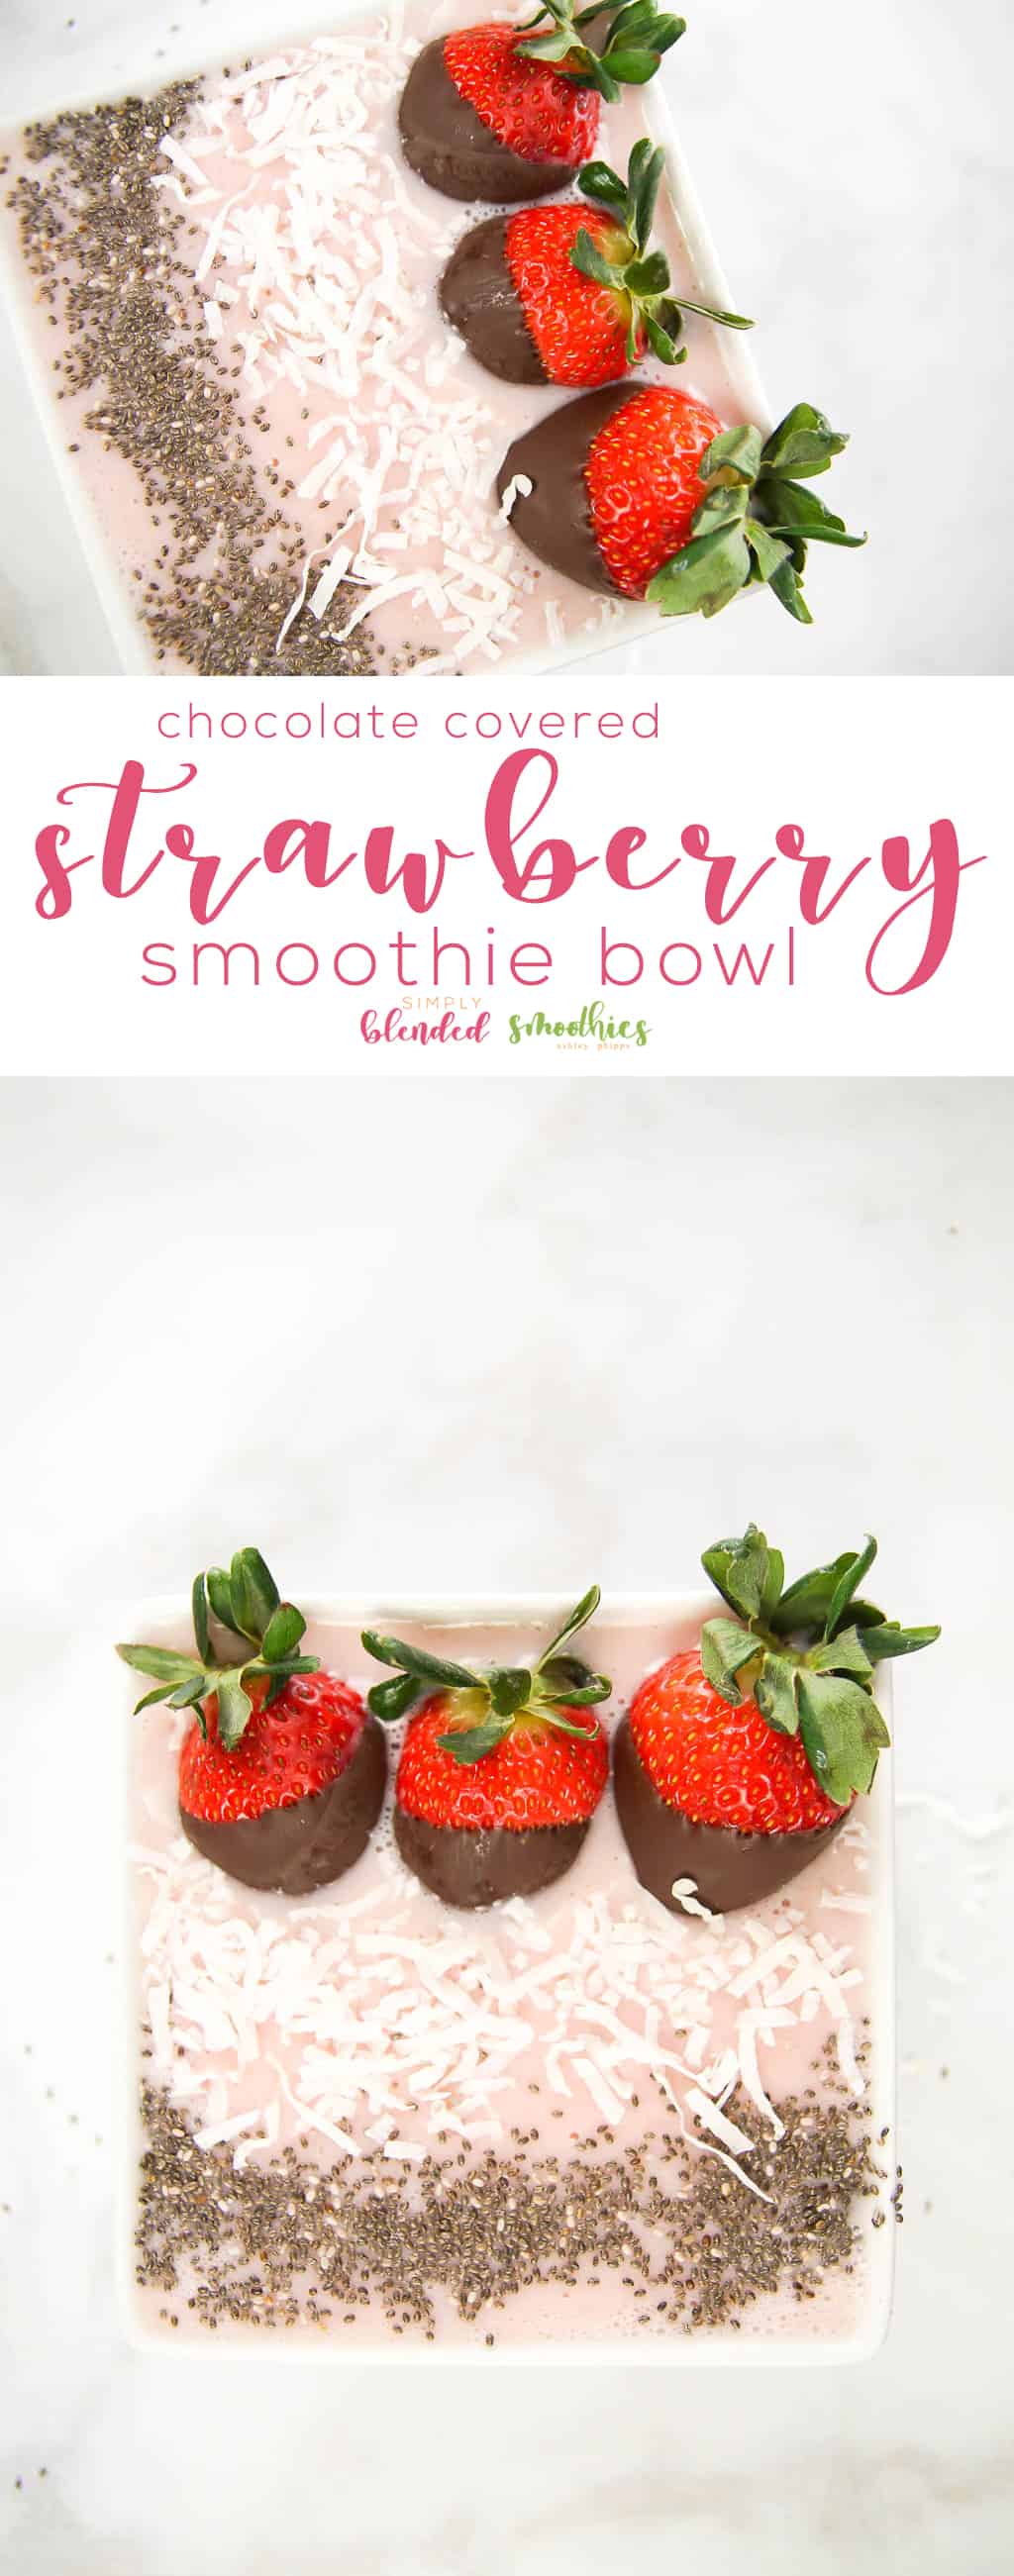 Chocolate Covered Strawberry Smoothie Bowl - A Delicious Strawberry Smoothie Bowl With Chocolate Covered Strawberries On Top - Smoothie Bowl